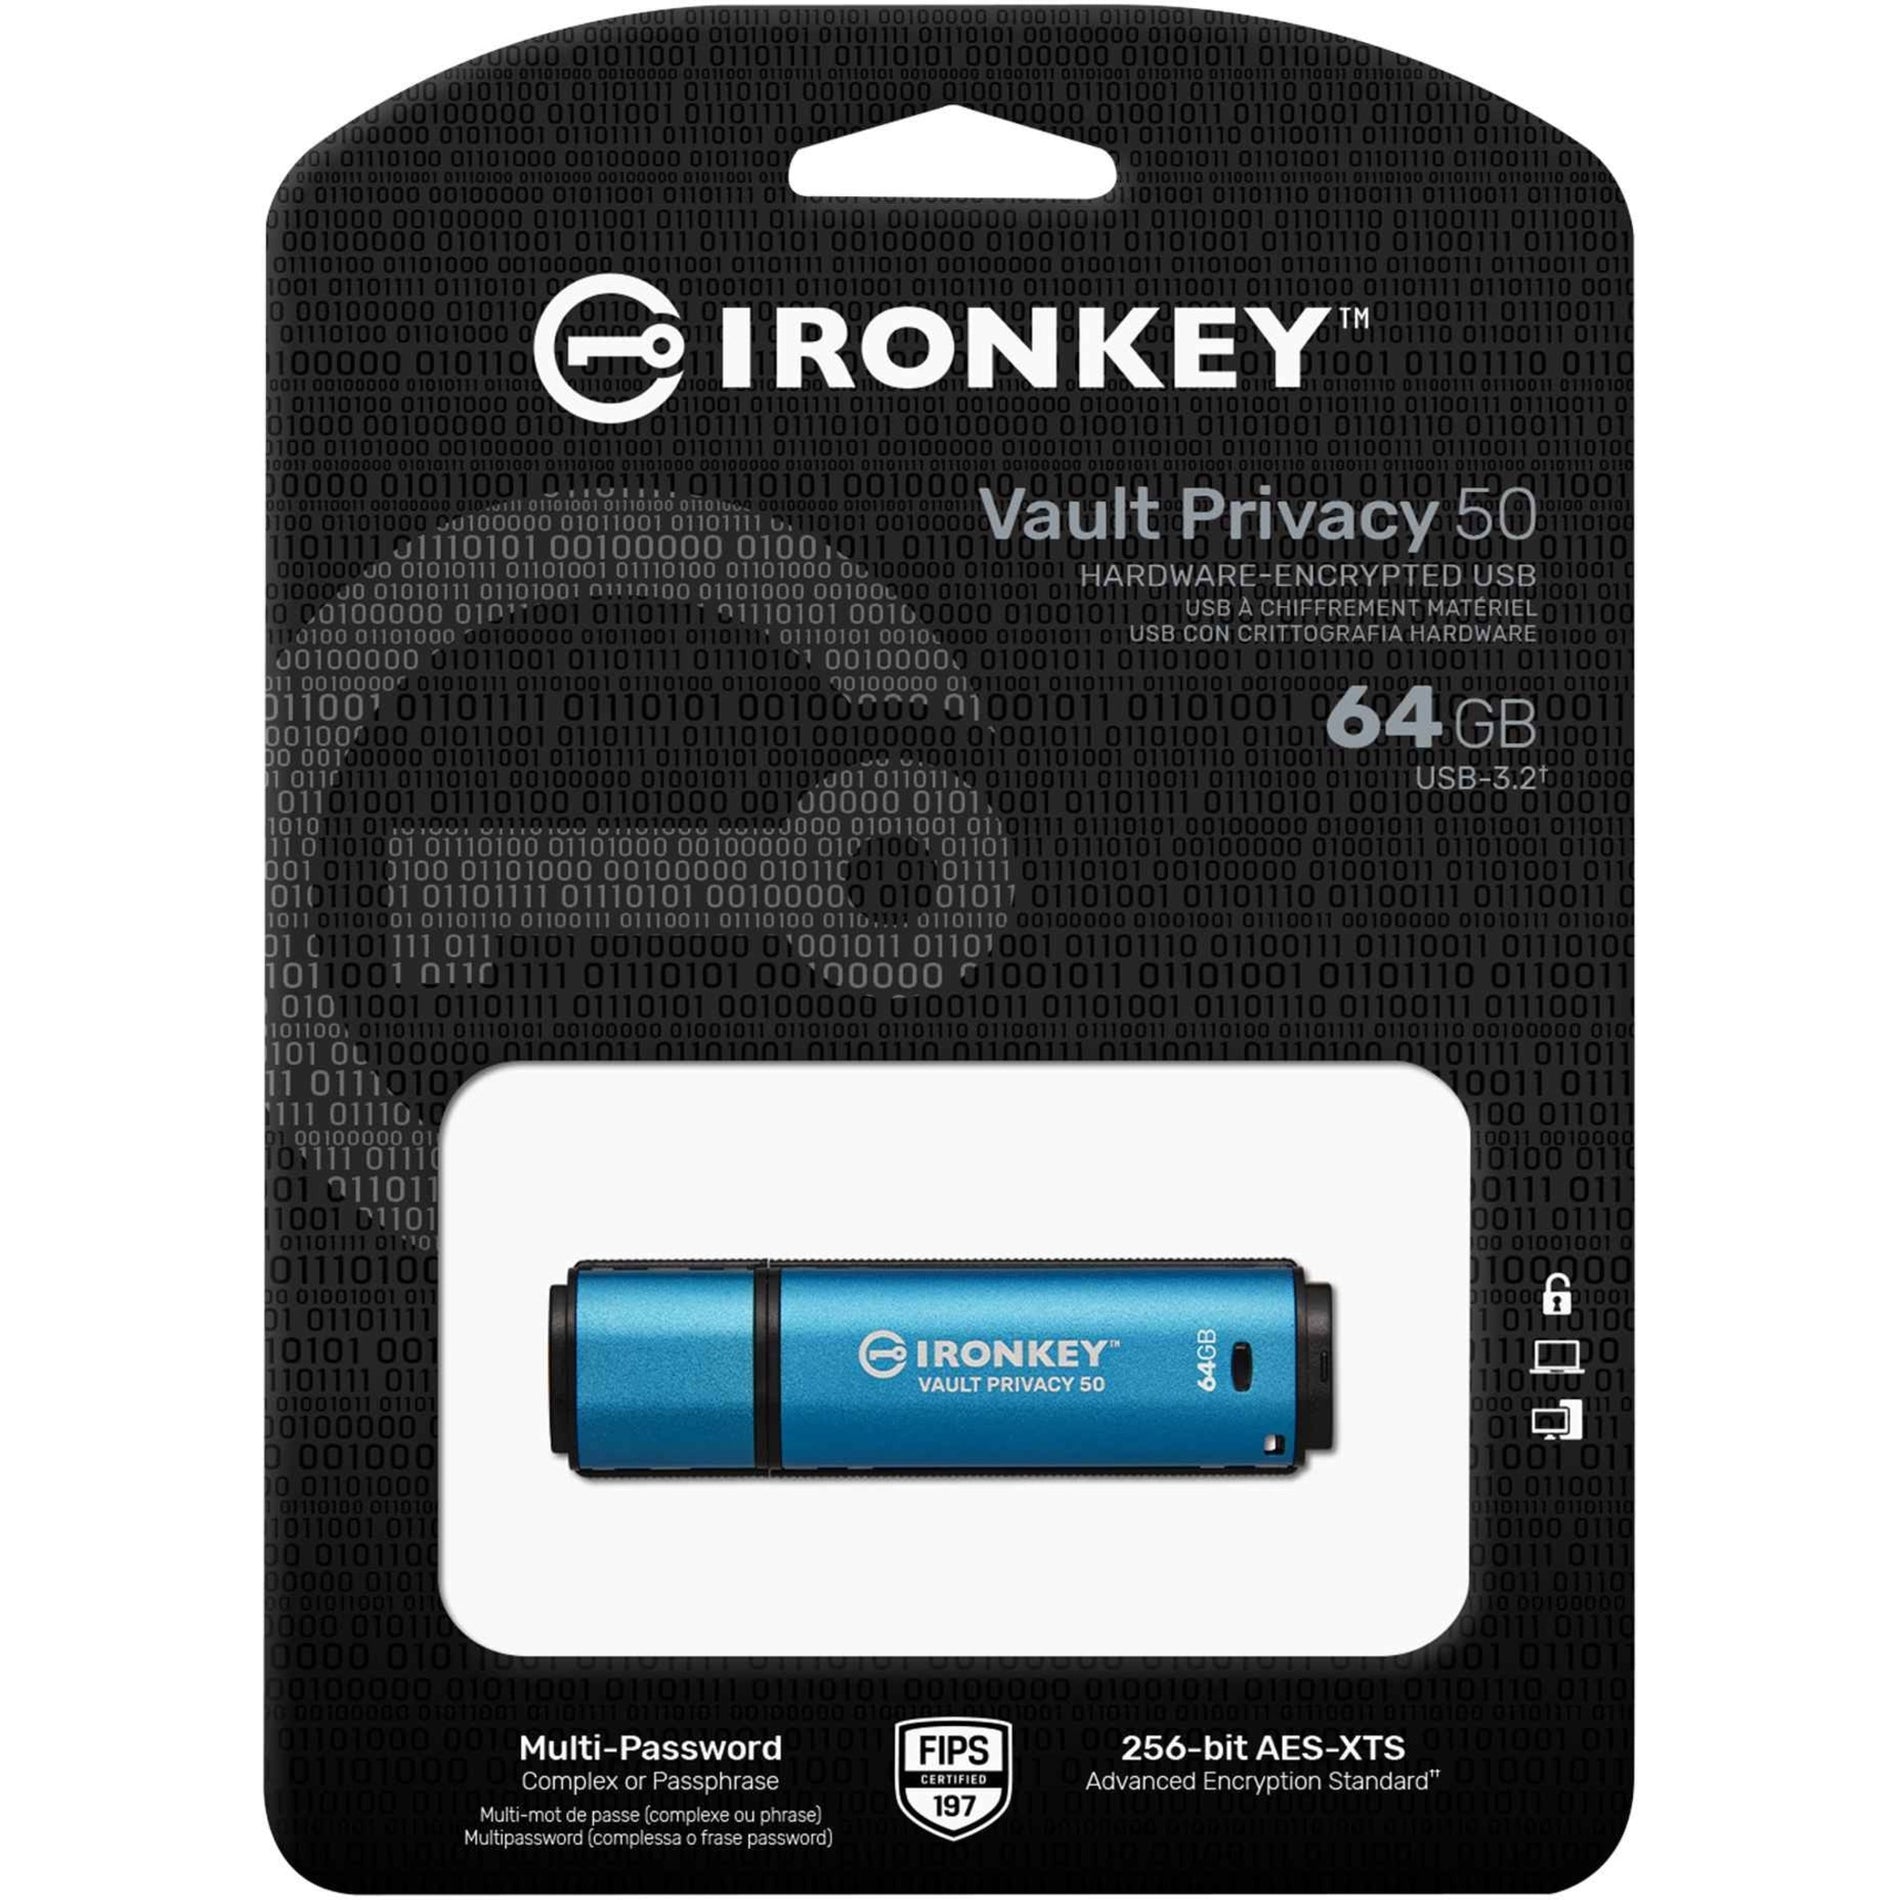 IronKey IKVP50/64GB Vault Privacy 50 Series 64GB USB 3.2 (Gen 1) Type A Flash Drive, Password Protected, 256-bit AES Encryption